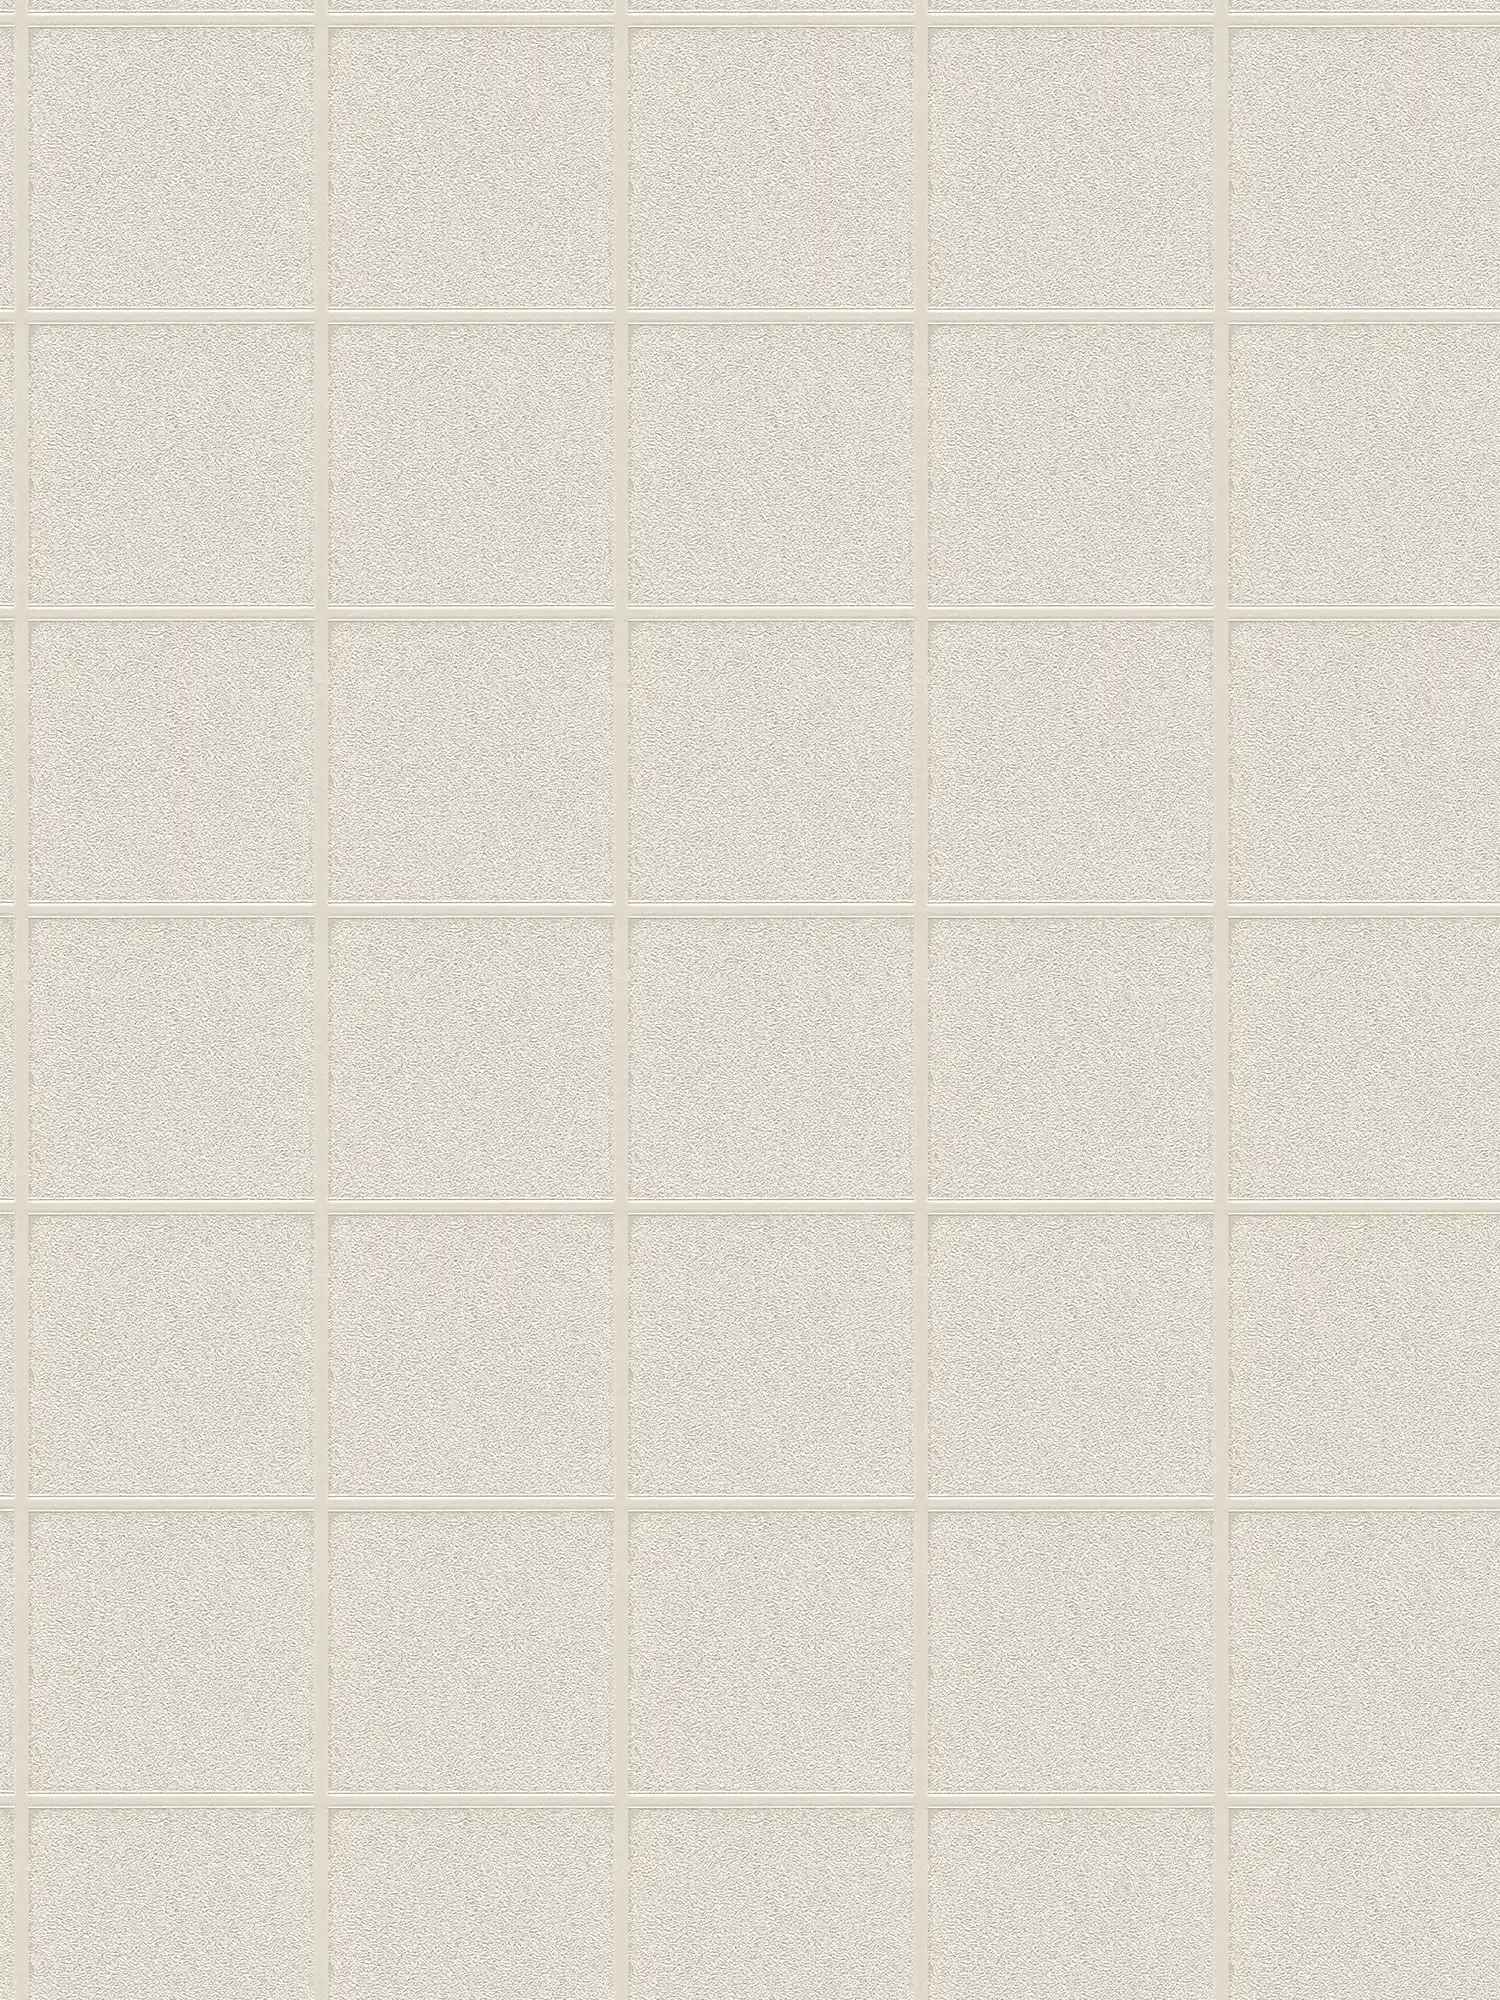 Wallpaper with tile pattern and 3D effect, mottled - silver, grey, white
